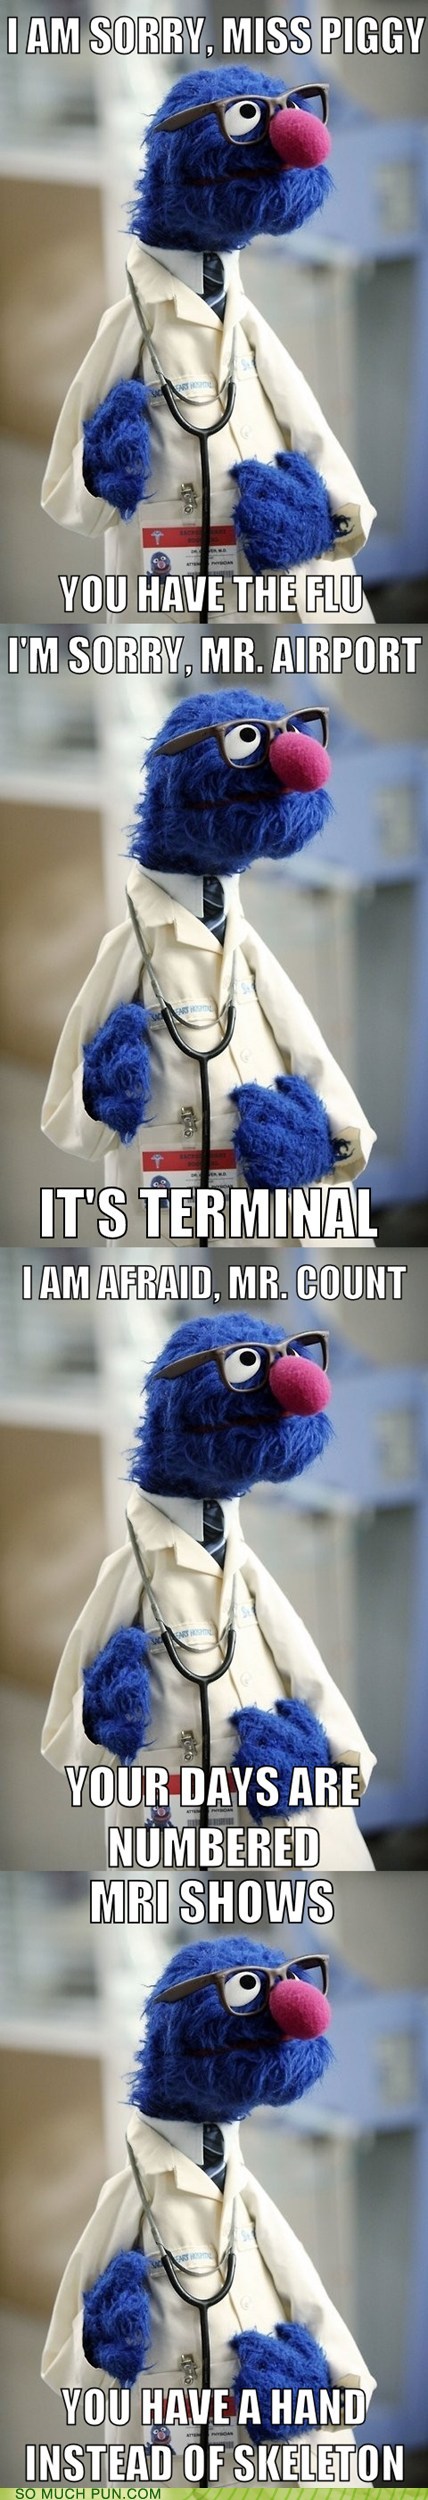 grover pun - I Am Sorry, Miss Piggy You Have The Flu I'M Sorry, Mr. Airport It'S Terminal I Am Afraid, Mr. Count Your Days Are Numbered Mri Shows You Have A Hand Instead Of Skeleton So Much Pun.Com